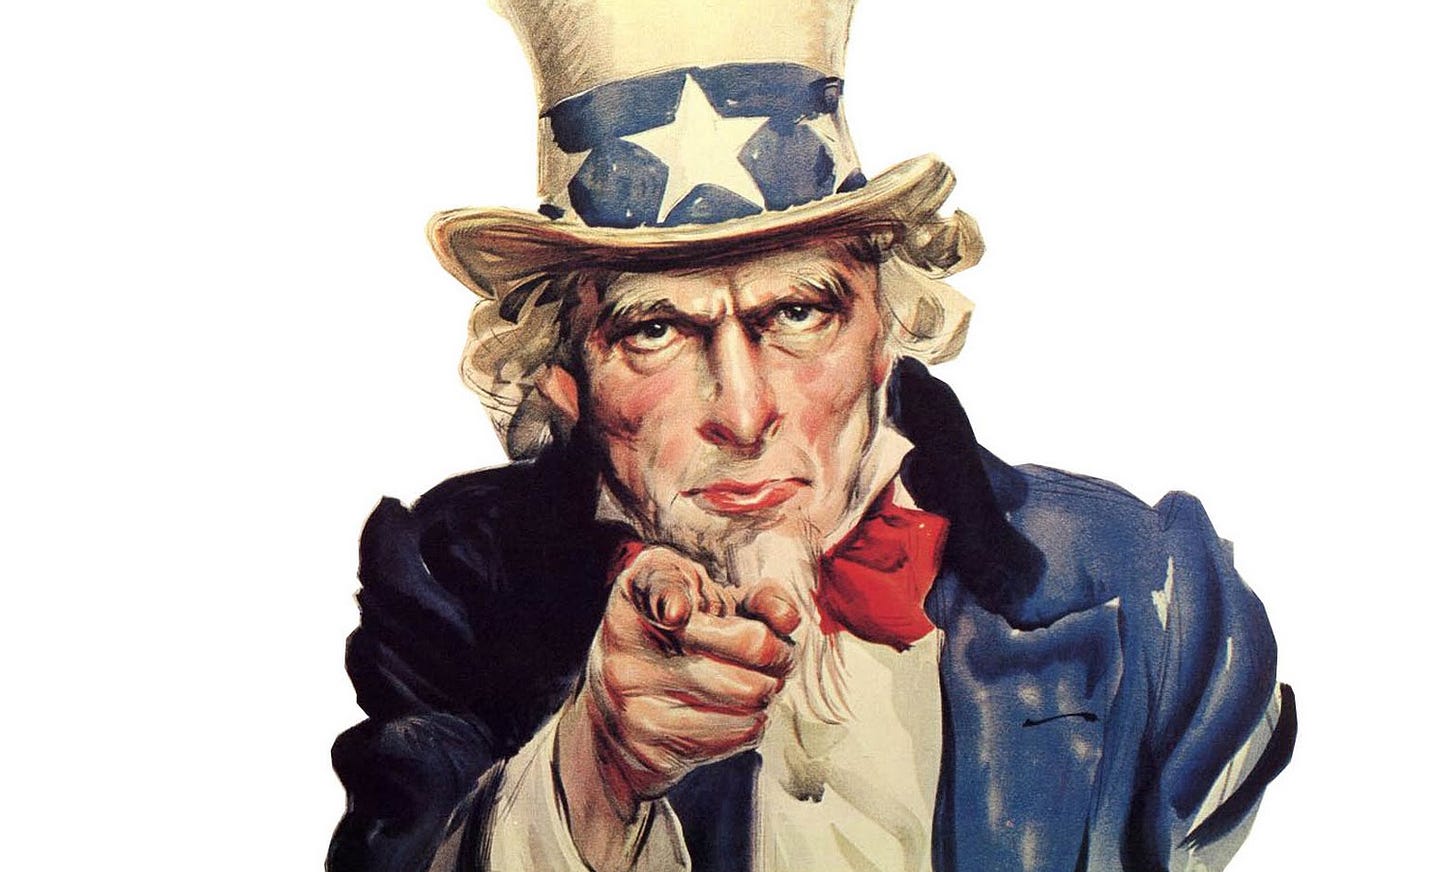 We Want YOU to Save a Life! - American Training American Training